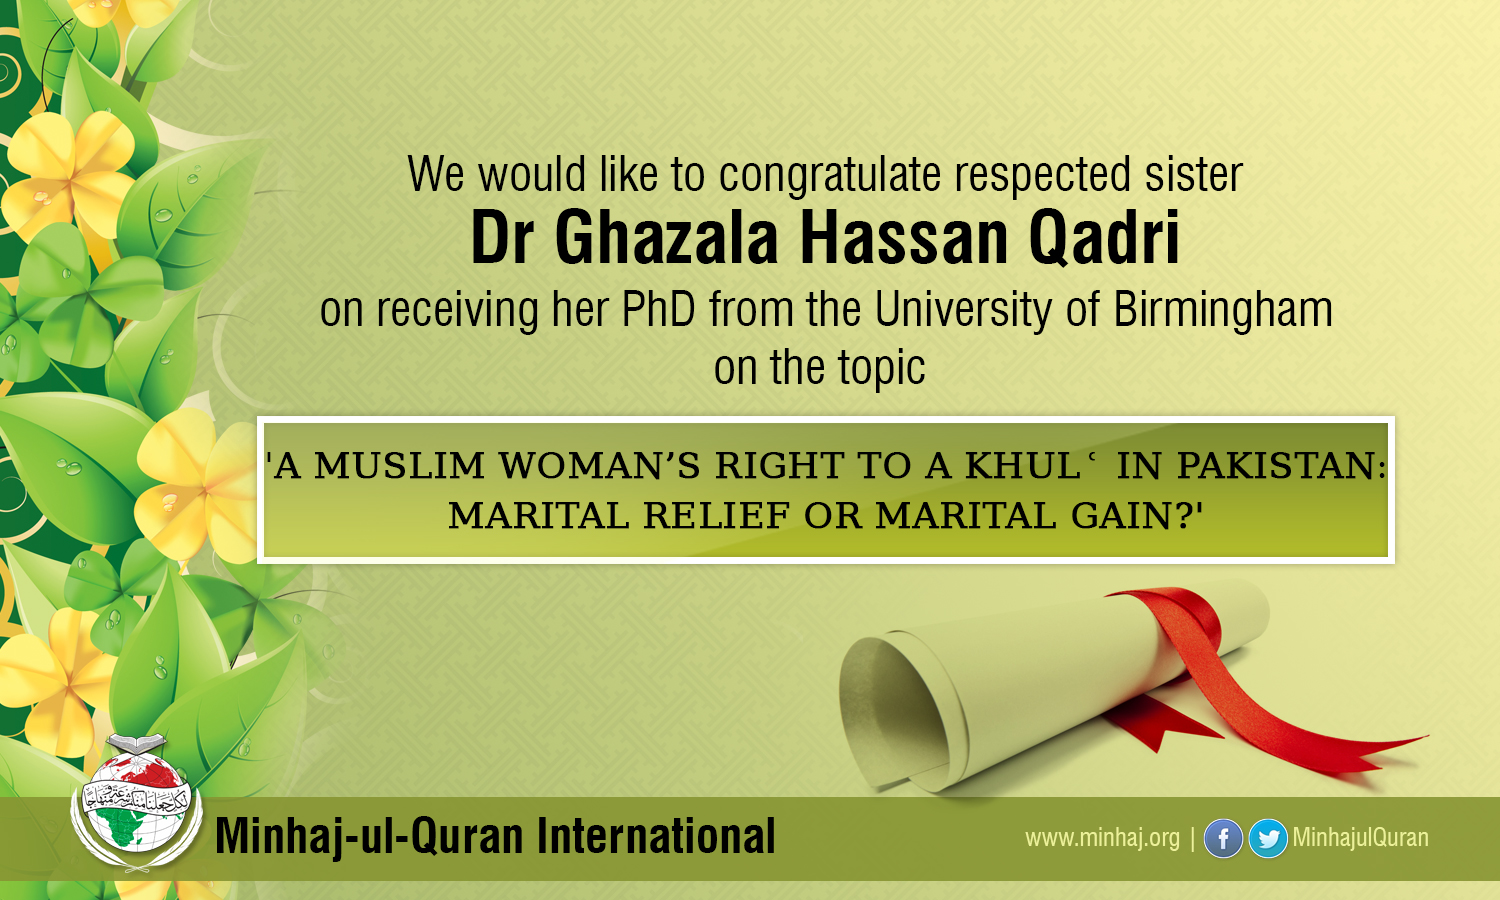 Congratulations to Respected Sister Dr Ghazala Hassan Qadri on receiving her PhD